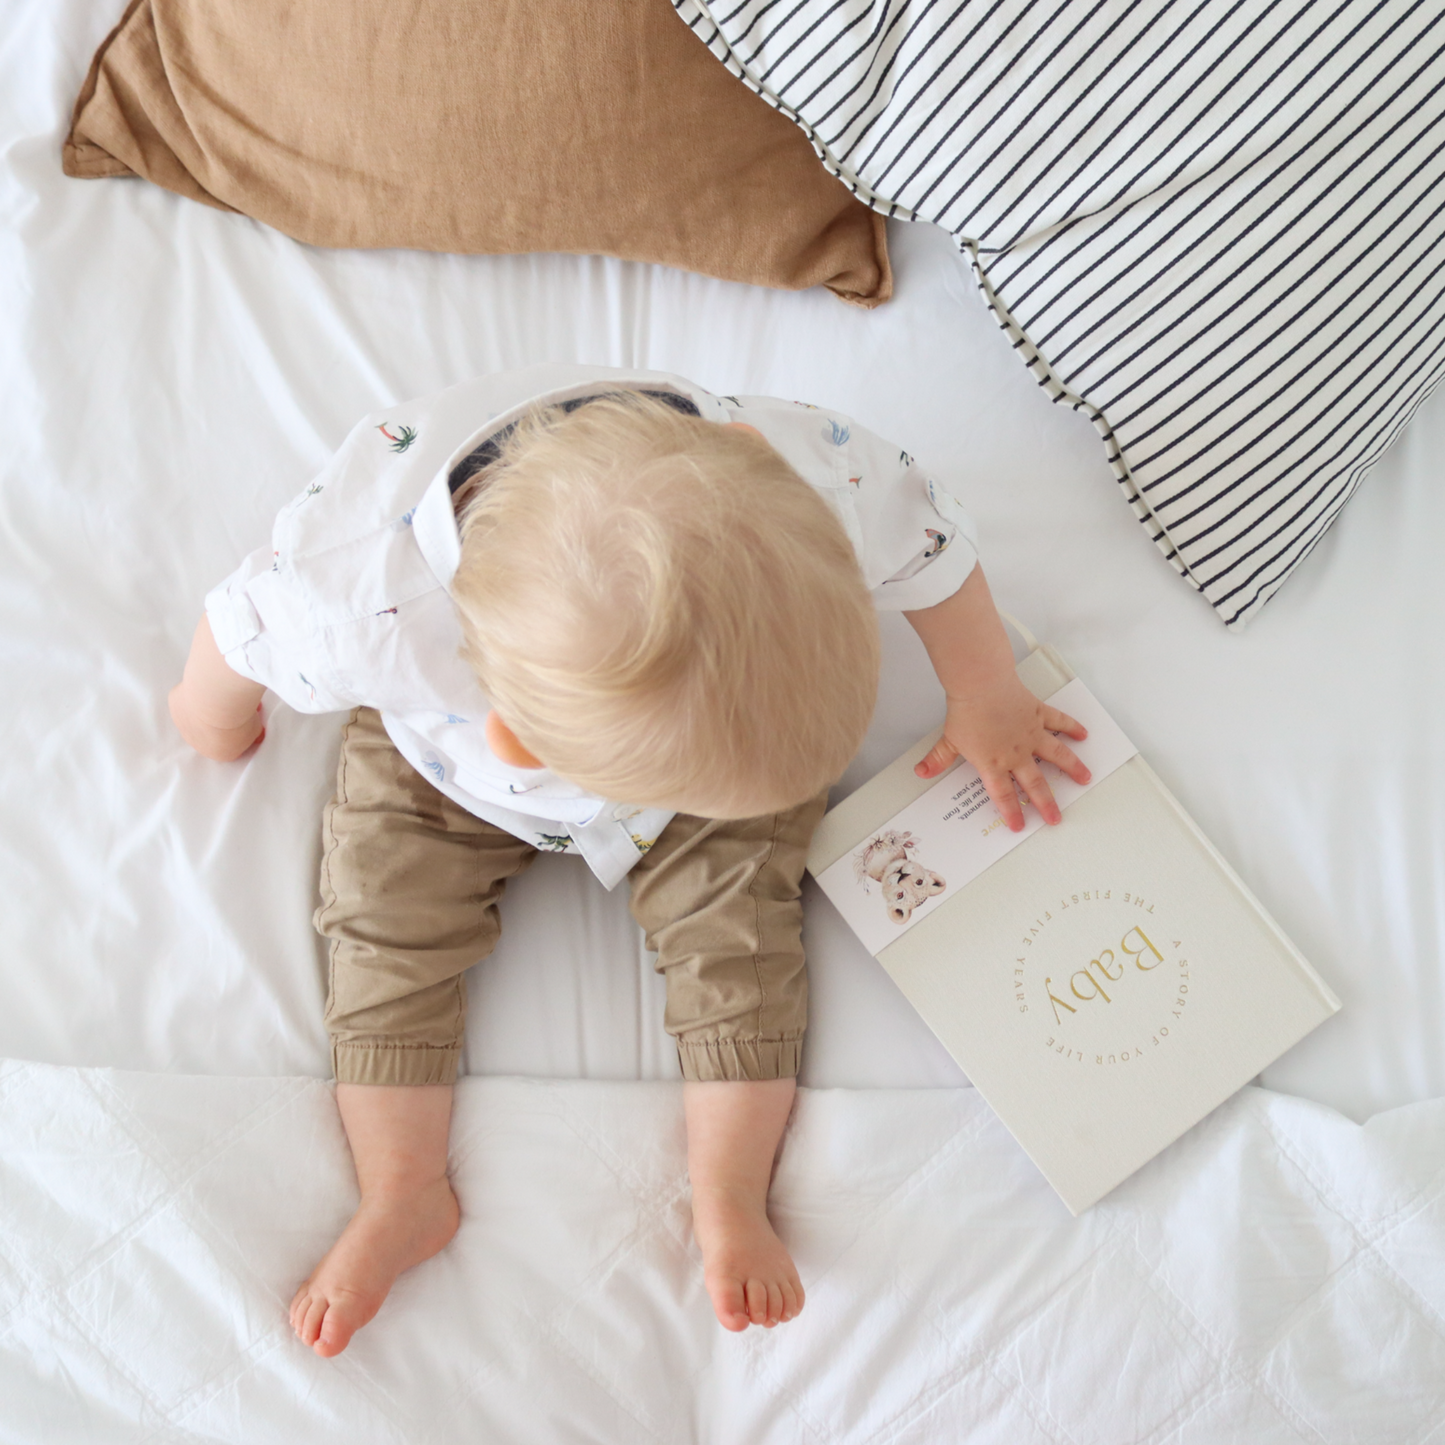 Baby Book with Pouch - Classic White Linen